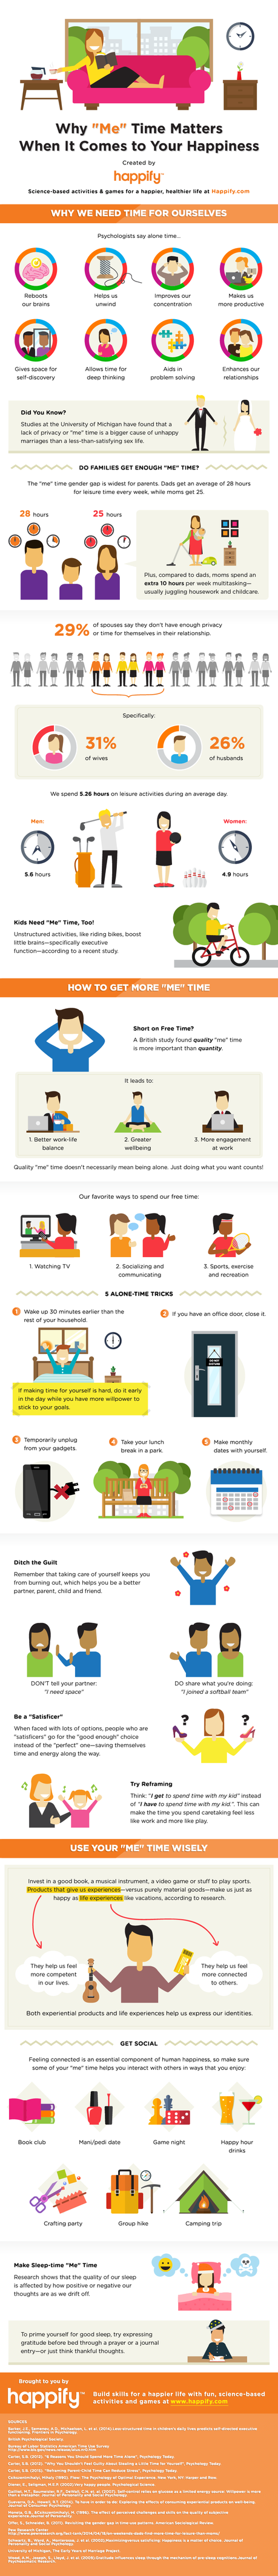 Why “Me” Time Is Important When It Comes To Your Happiness #Infographic